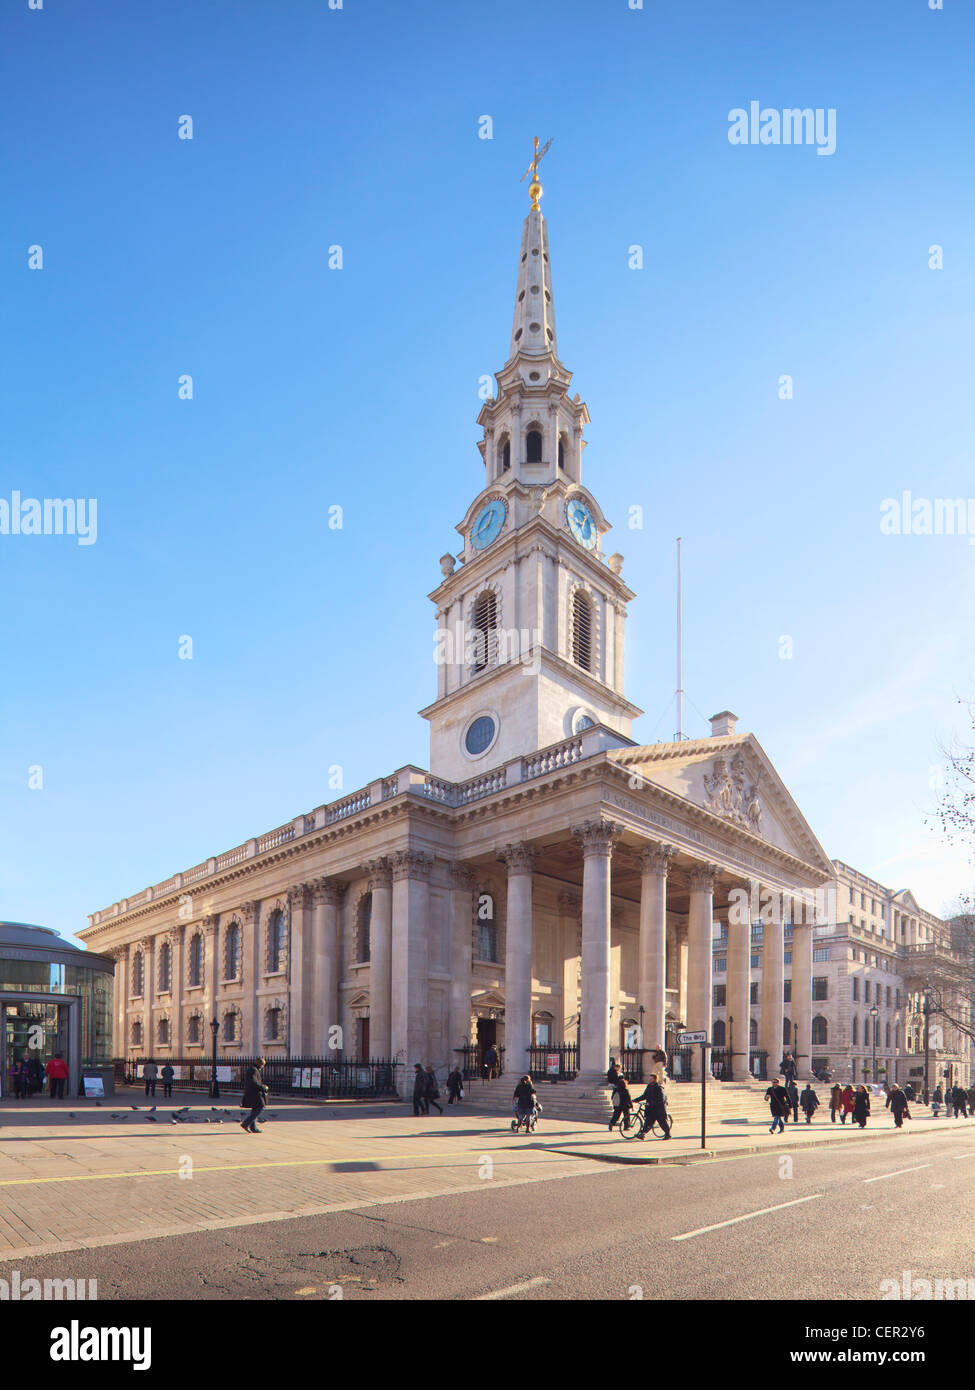 St. Martin in the fields, London Stock Photo